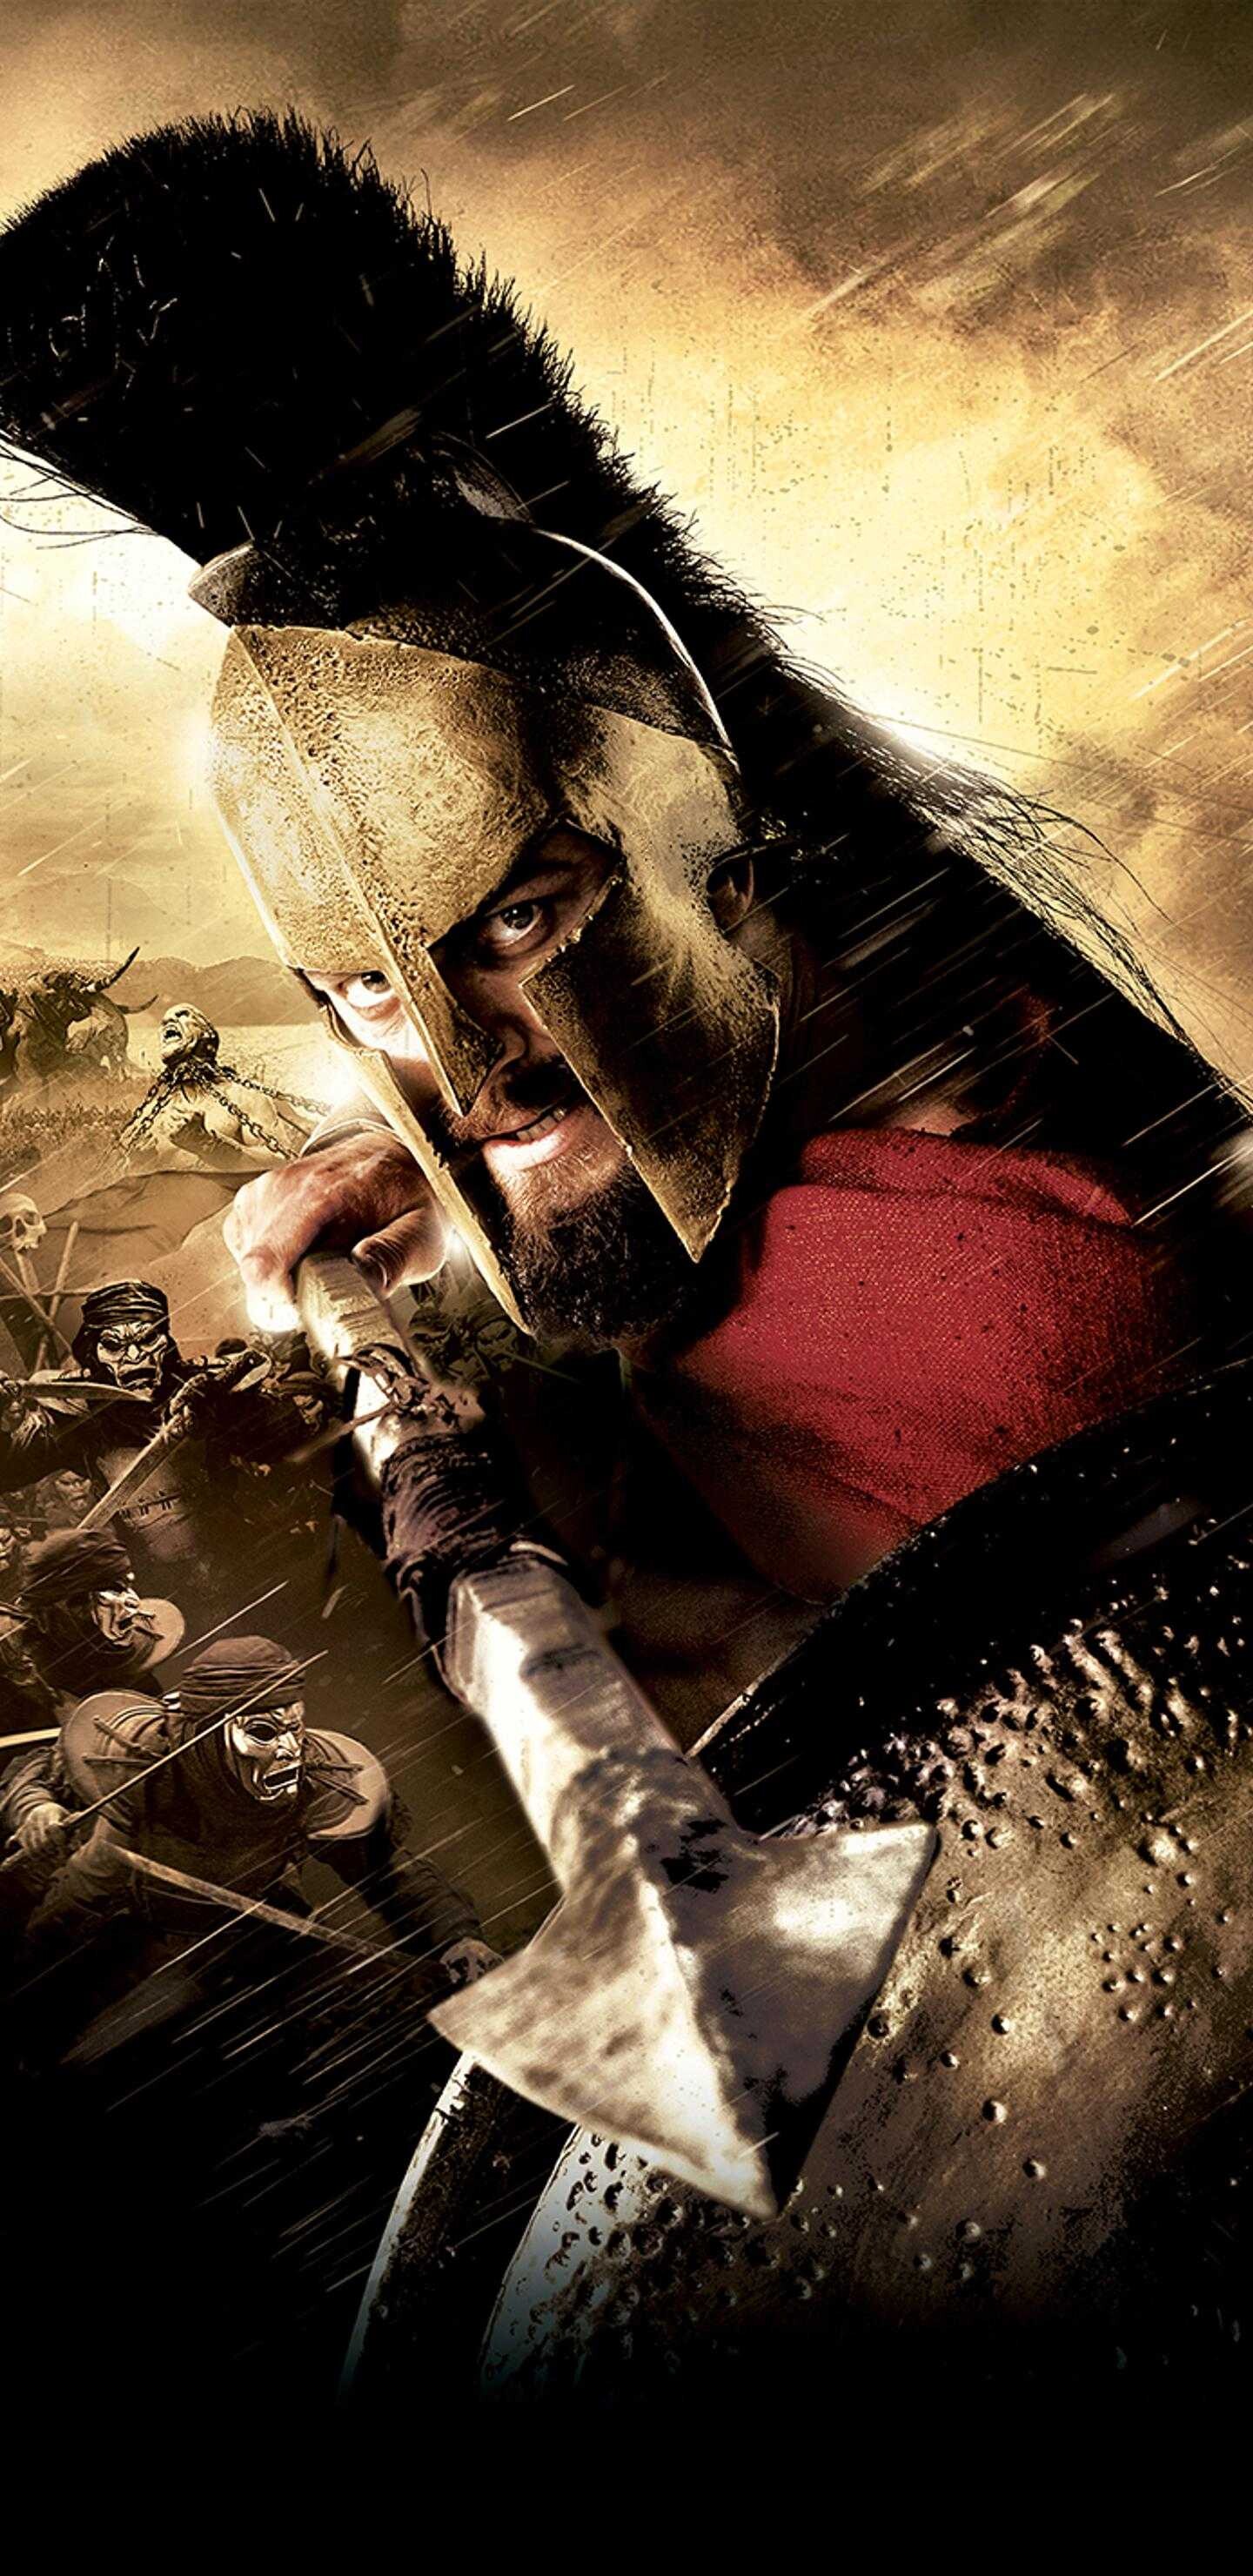 Sparta: 300 poster, A 2006 American epic historical action film, The Battle of Thermopylae in the Persian Wars. 1440x2960 HD Wallpaper.